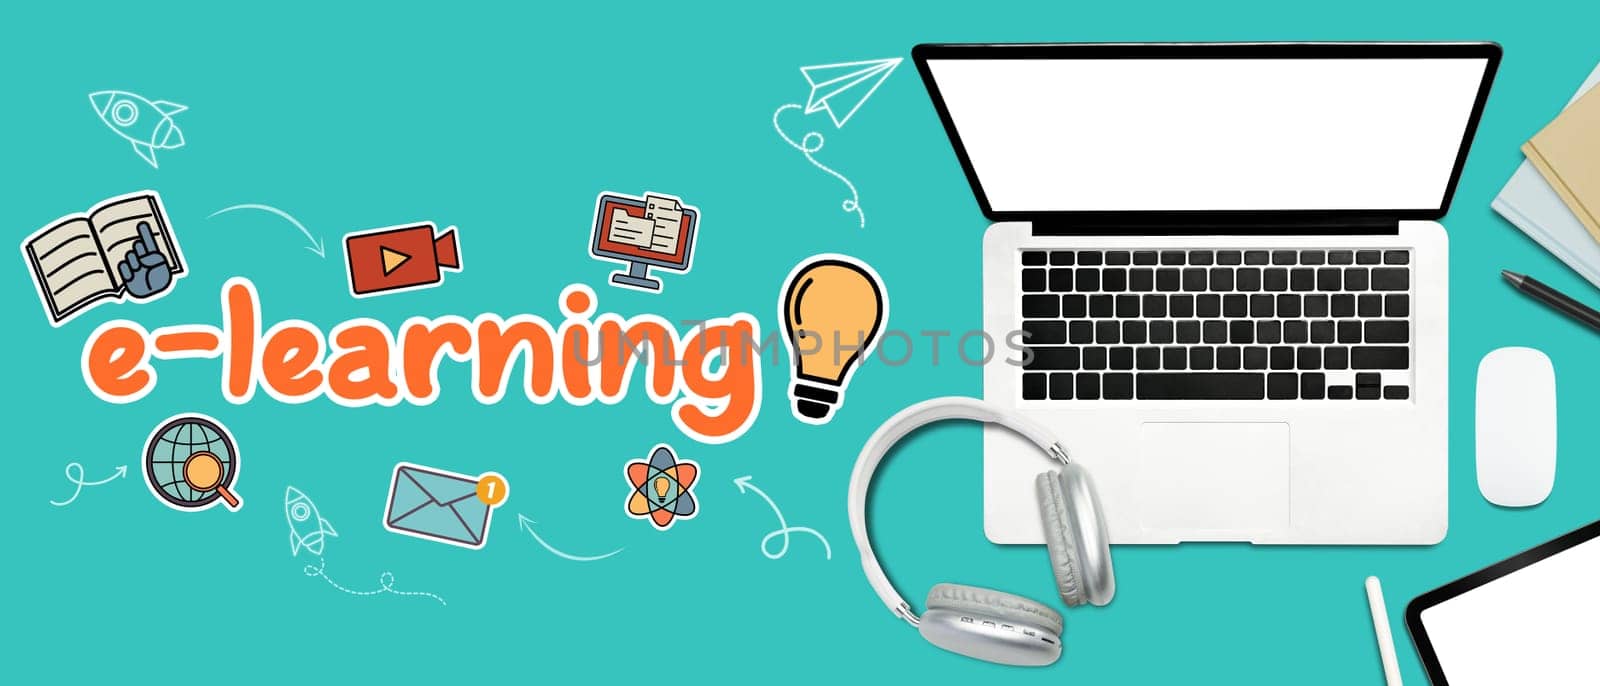 Laptop, headphone and stationery on blue background with the word e-learning by prathanchorruangsak